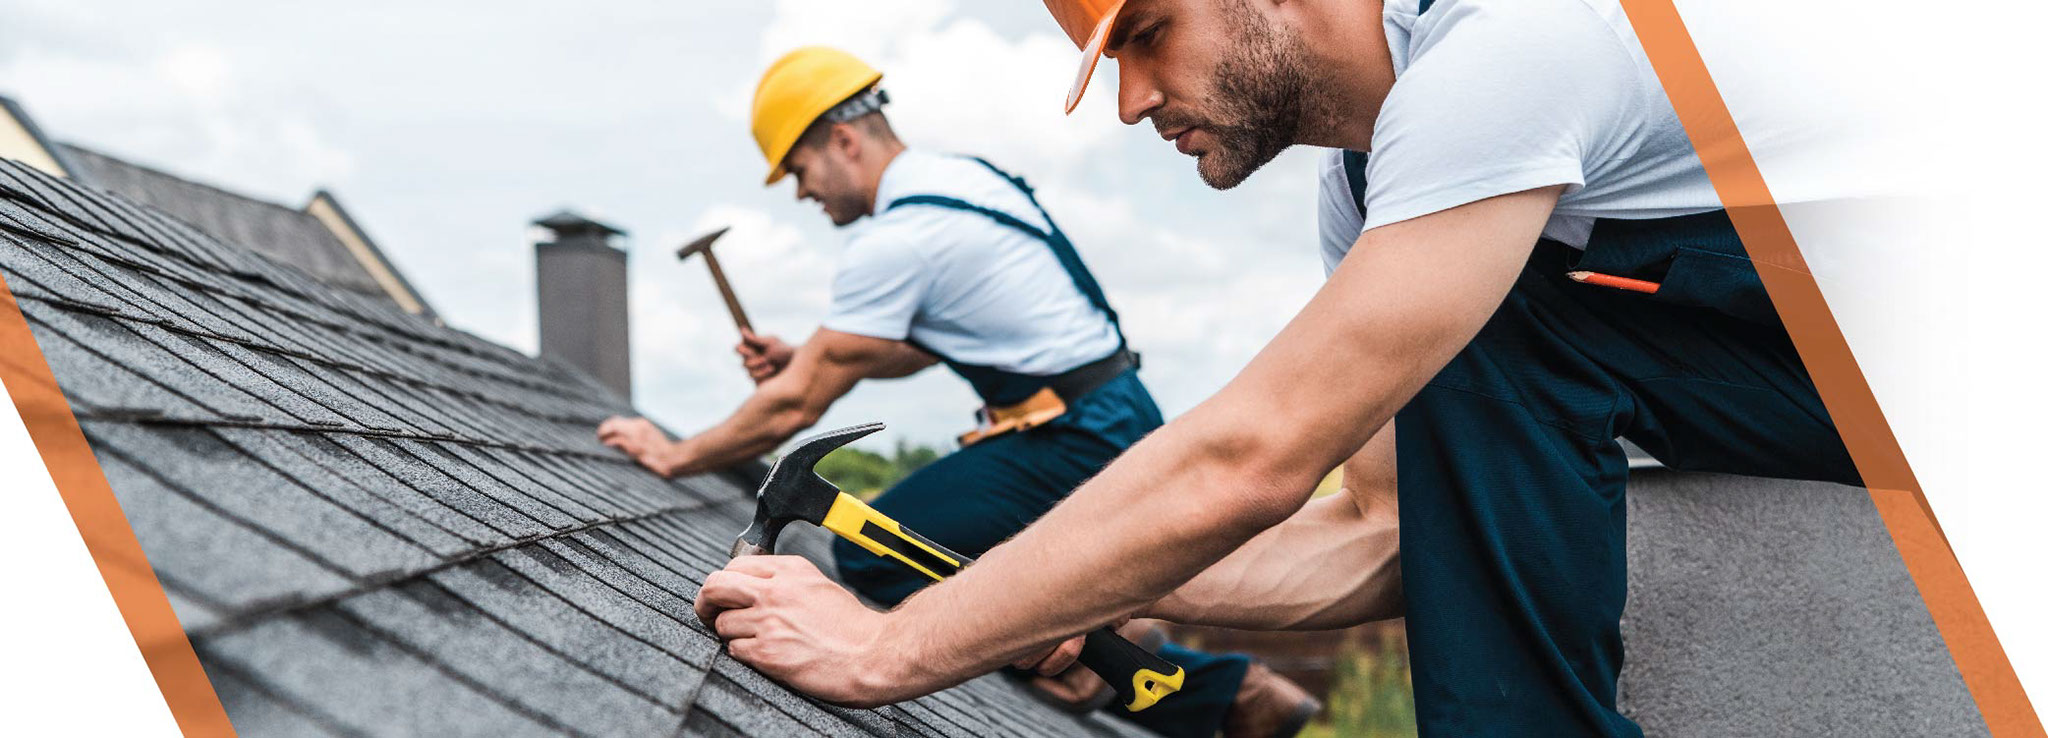 New Florida Statute Changes Building Code Requirements for Roof Repairs